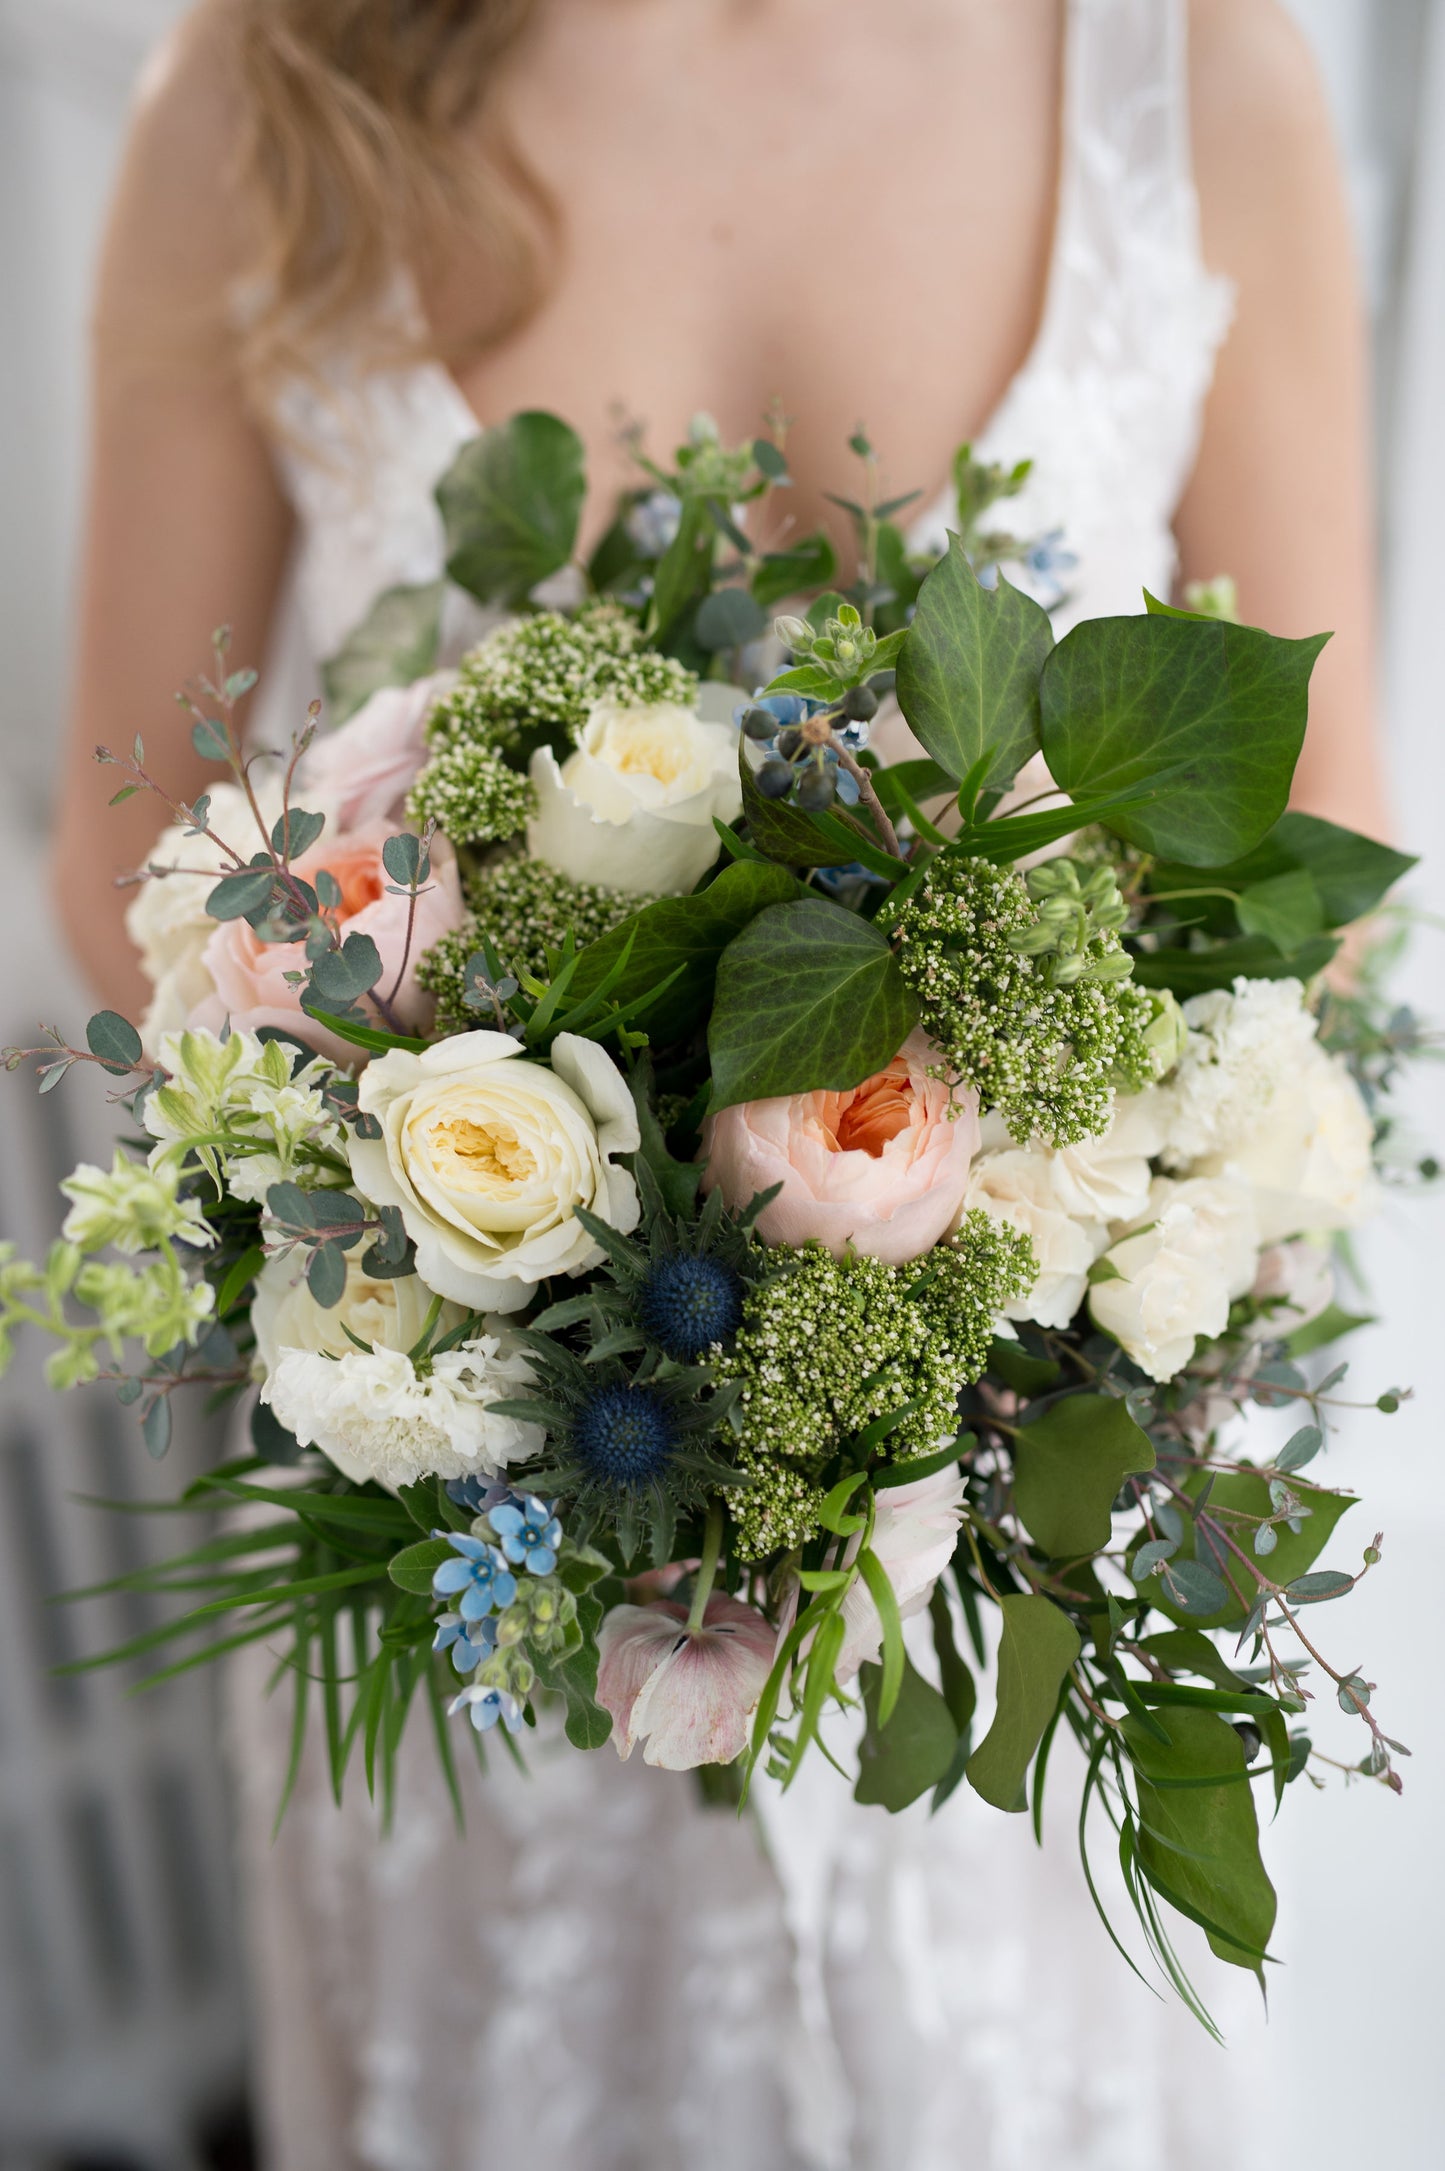 An asymmetrical design, a lot of movement and depth between the flowers, placing each bloom on a different plane, so that the bouquet has an airy quality and feels more natural and freshly picked- The Flower Nook - Toronto Florist